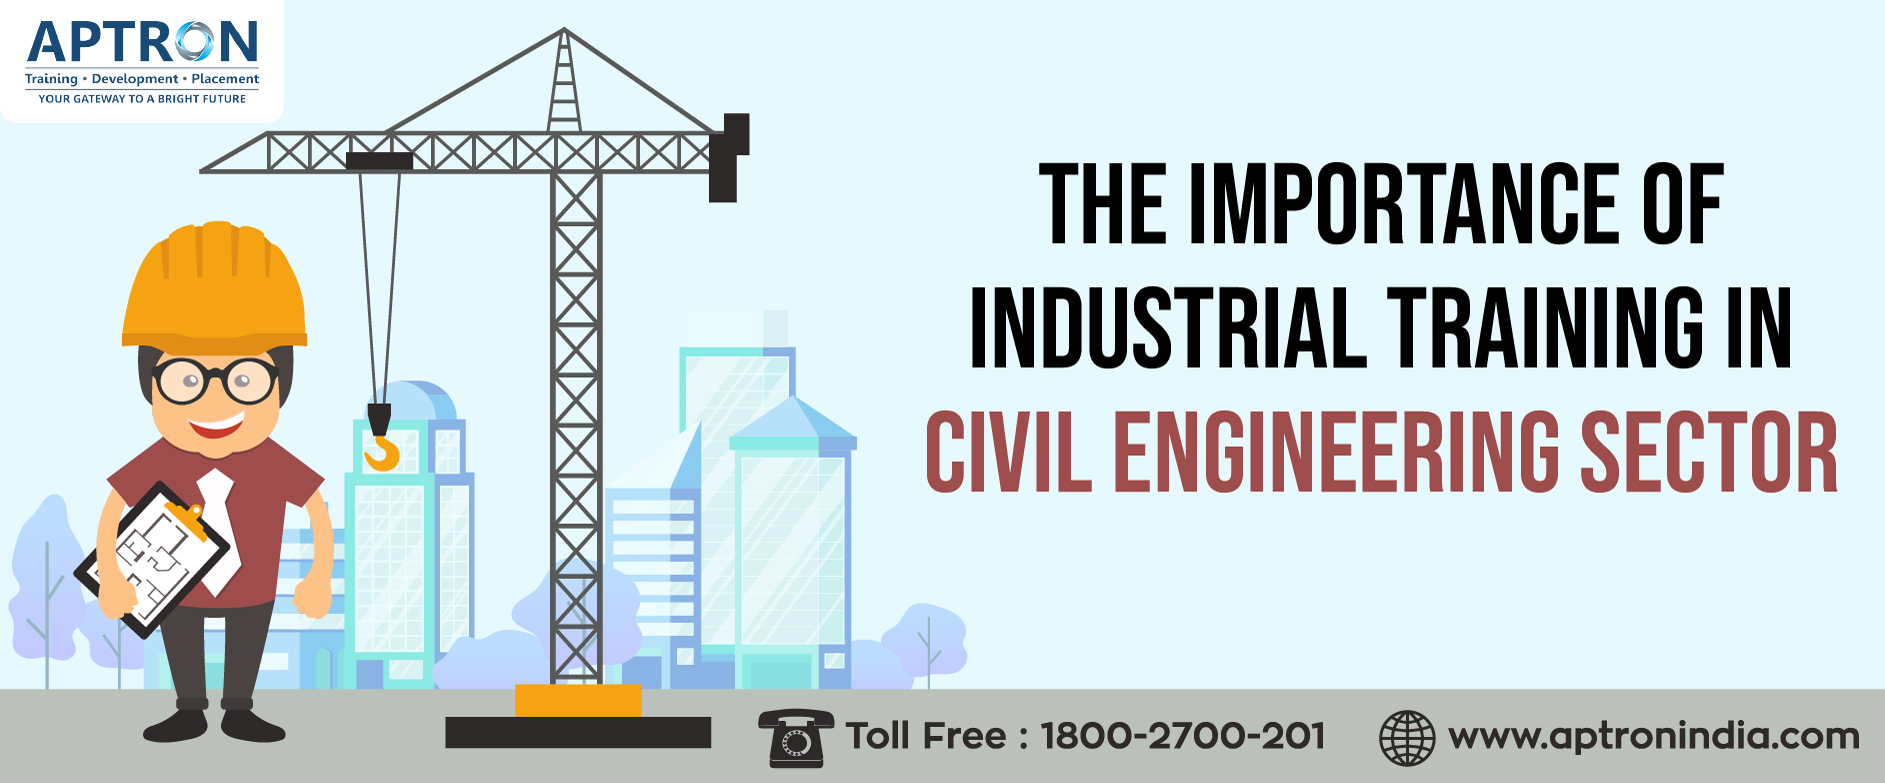 The Importance of Industrial Training in Civil Engineering Sector